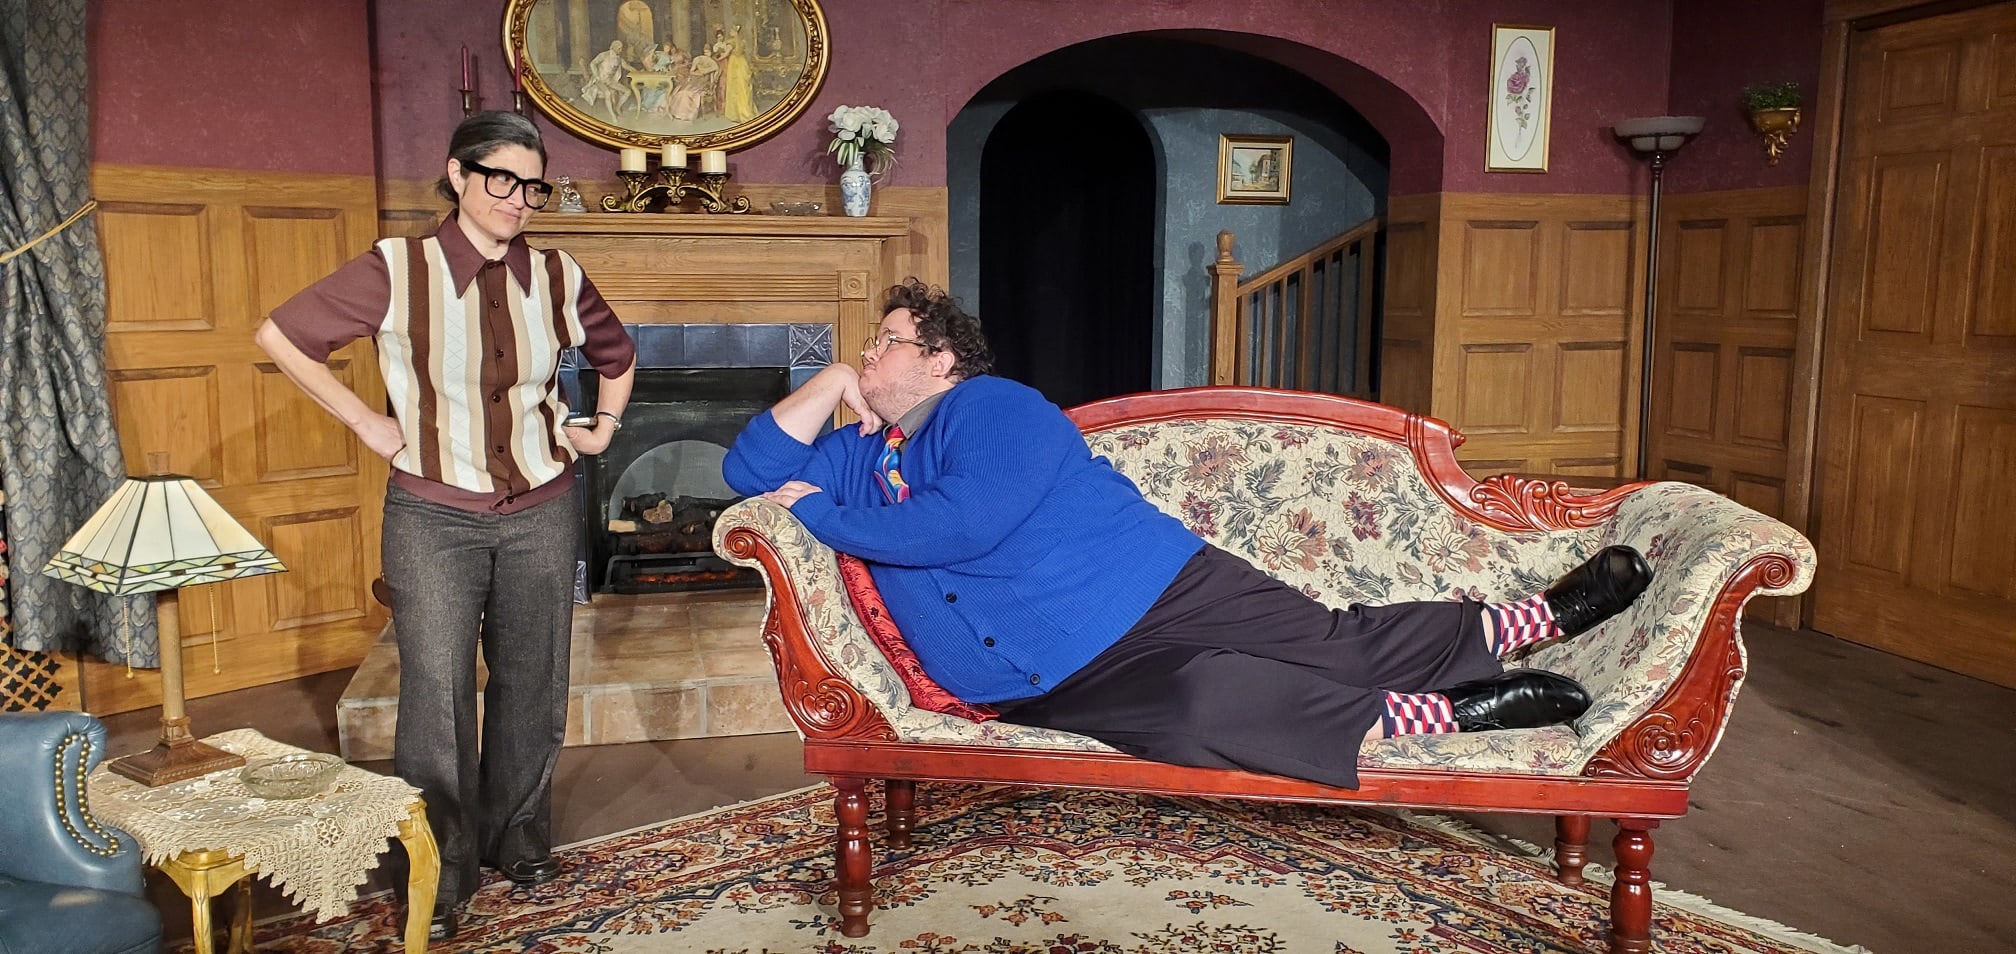 Scene from The Mousetrap